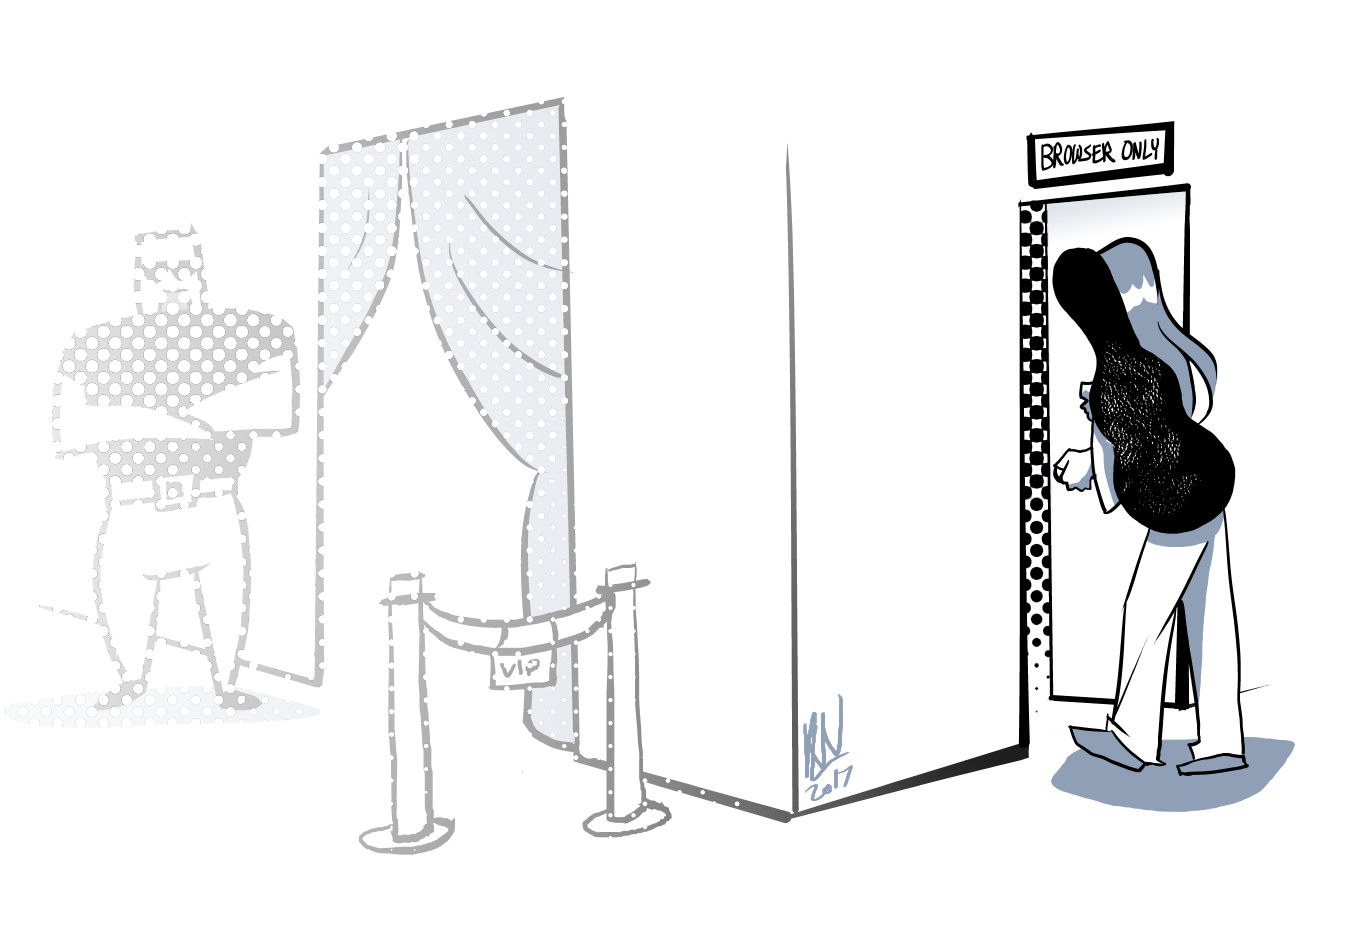 Illustration showing a band member entering the club through a side door, labelled "Browser Only"